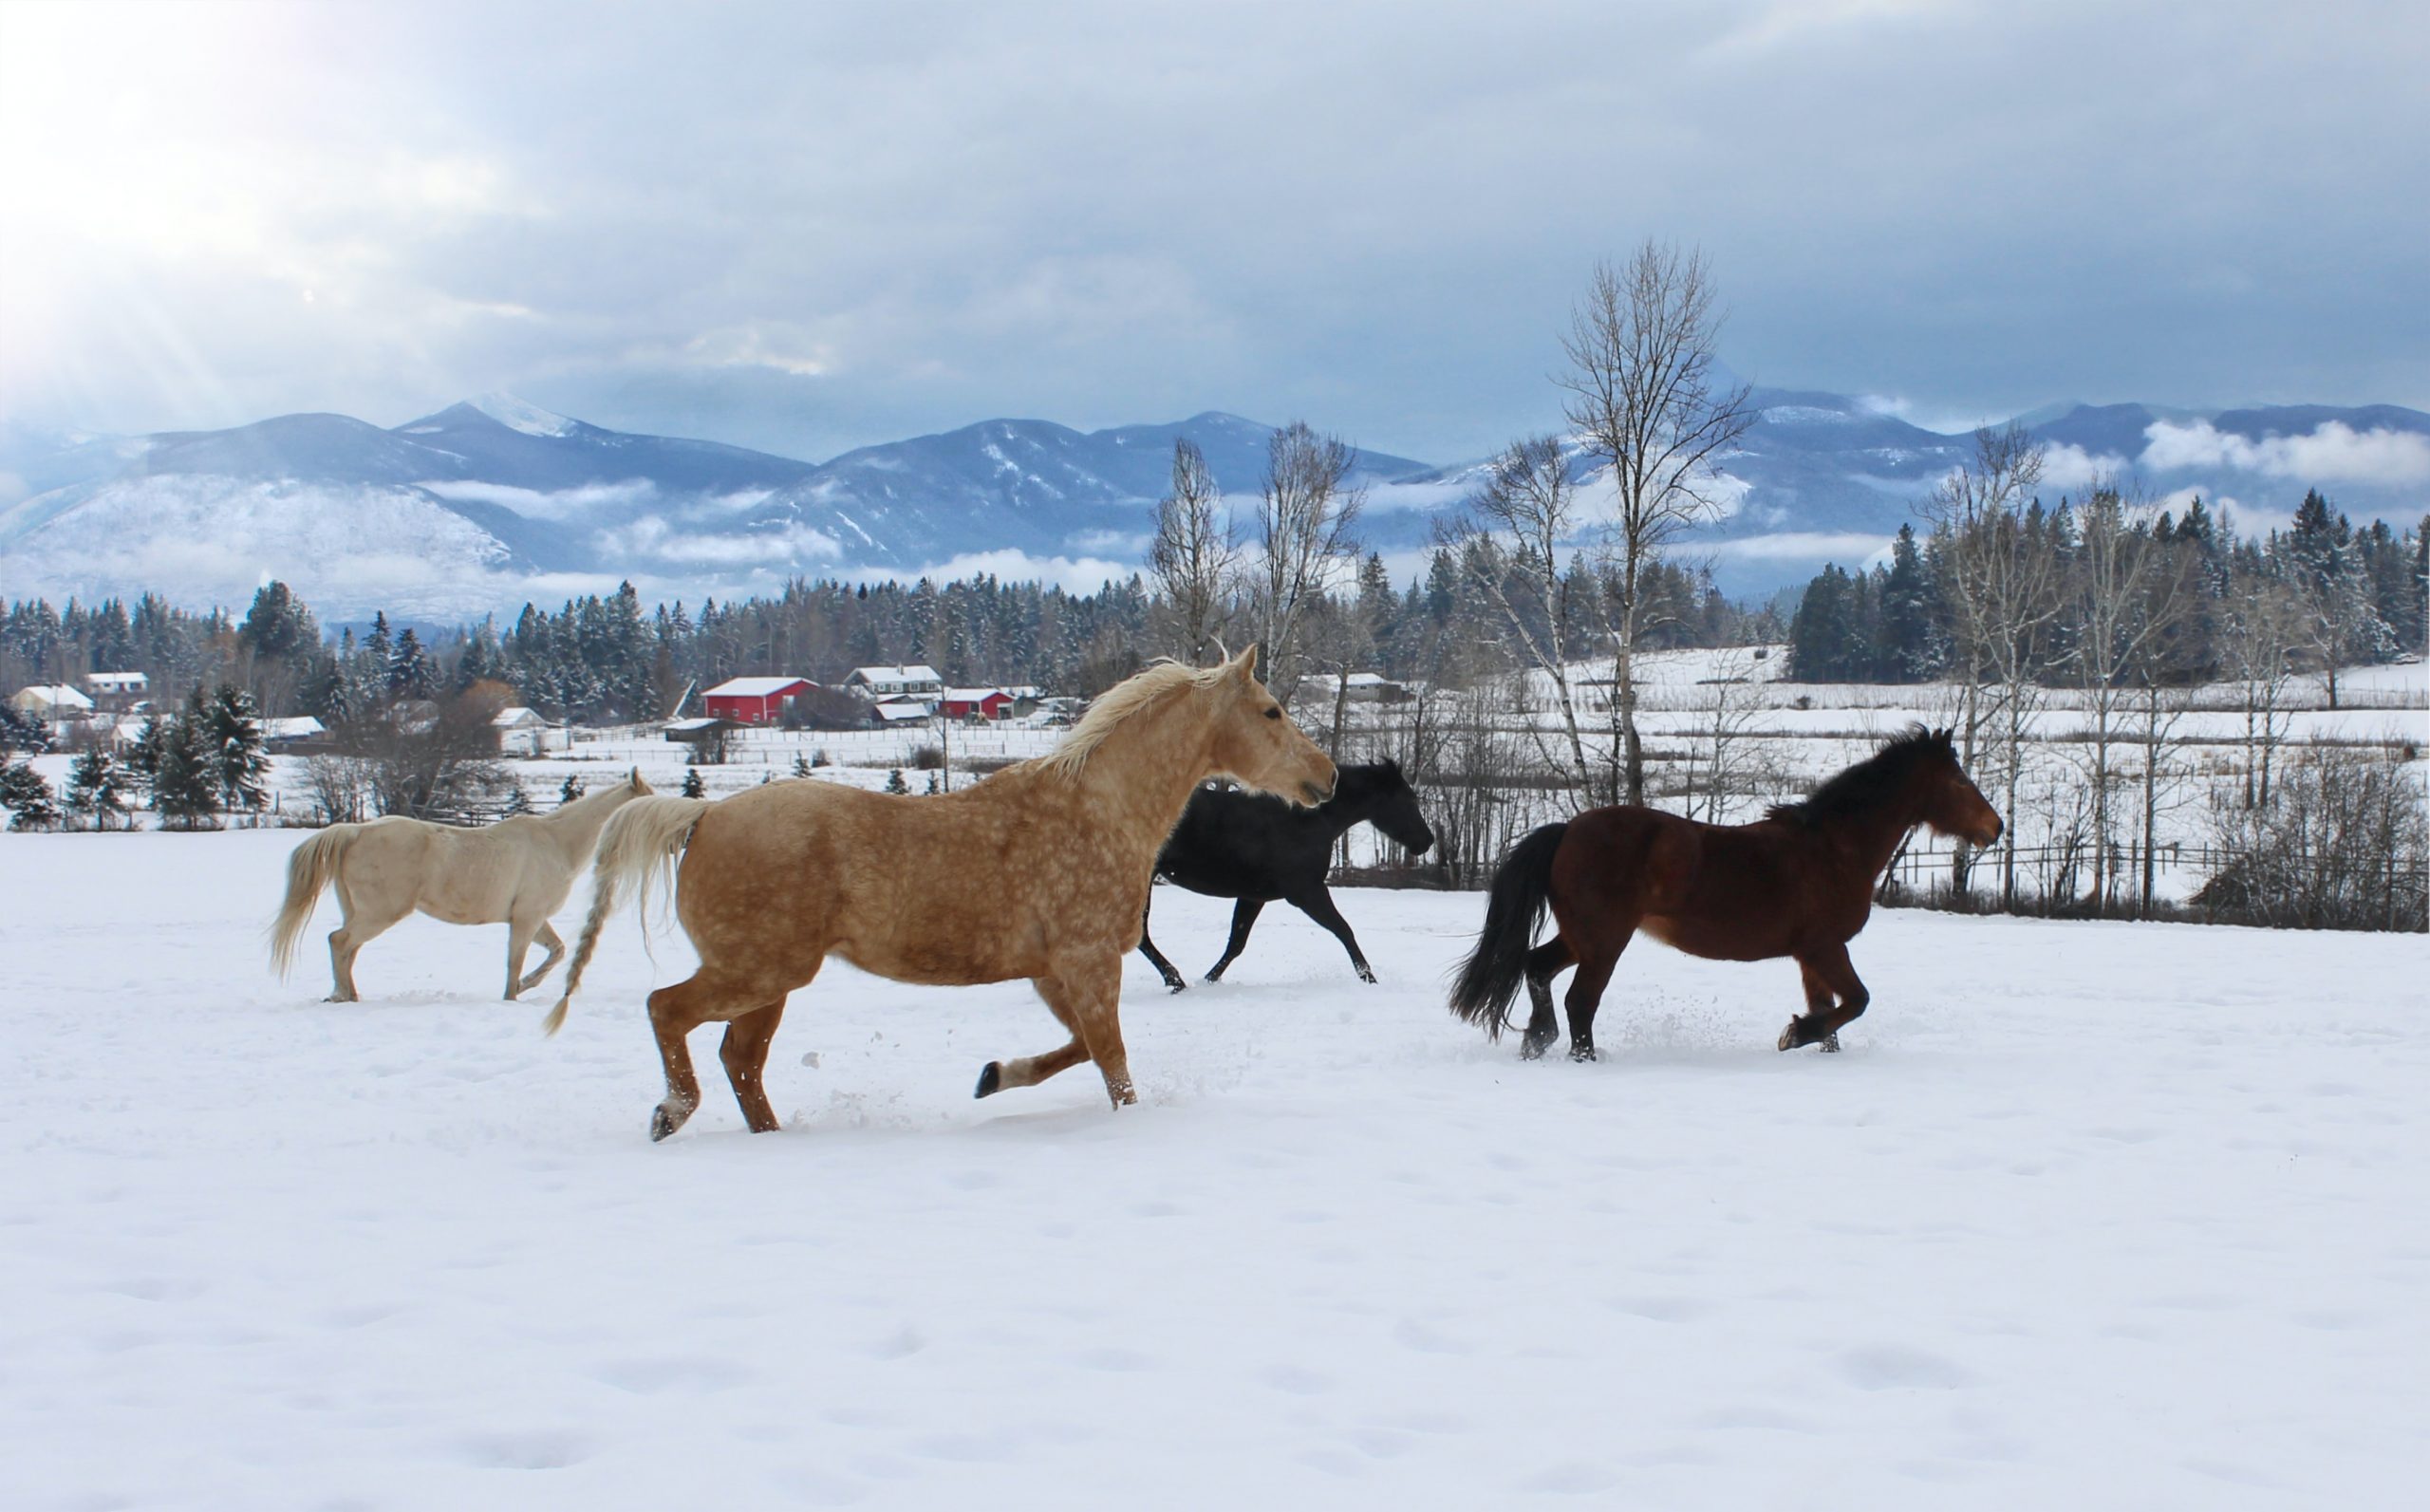 A photograph of a snow covered paddock with four horses galloping through it. The pair of horses on the left are a light palomino colour, and the two on the right are dark brown. In the background, a pine forest and several snowy mountaintops rest peacefully.